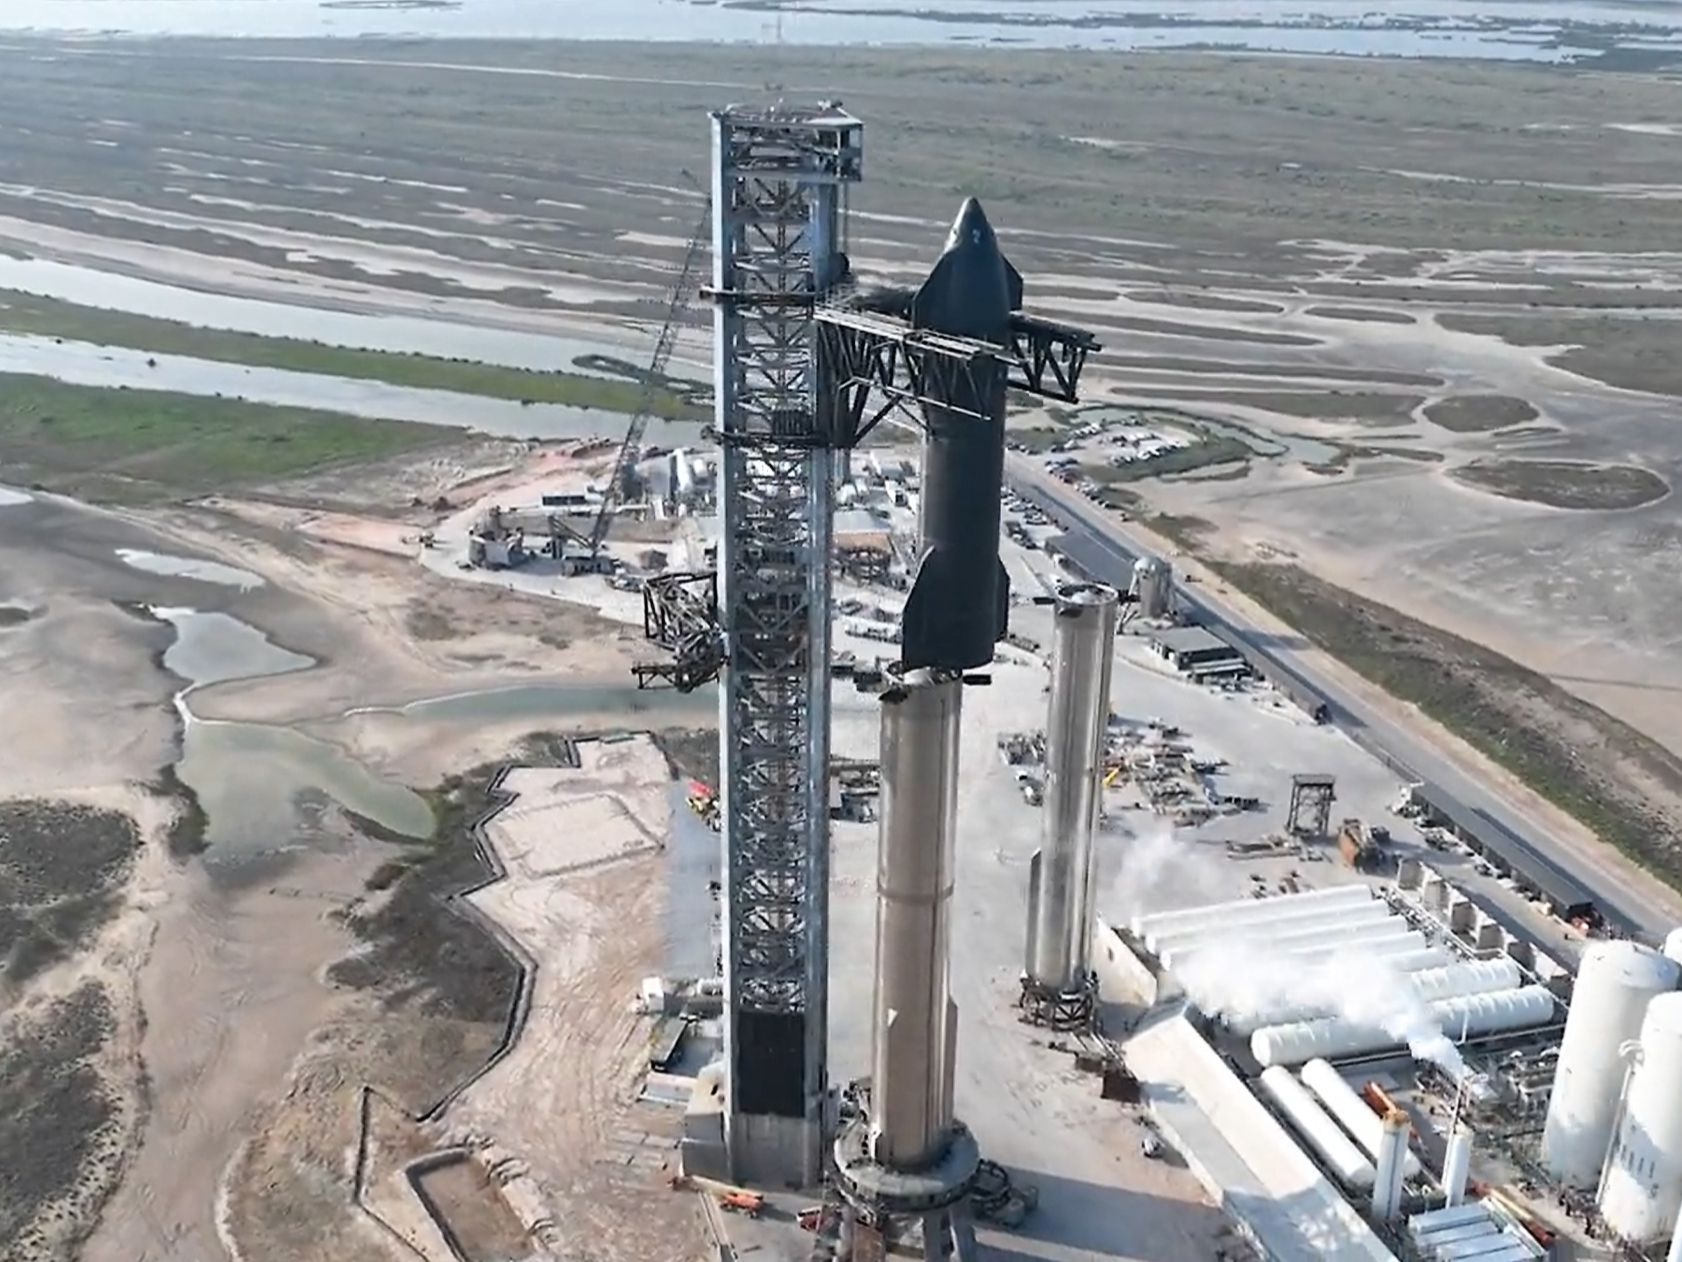 Starship 24 stacked on the Super Heavy Booster 7 at SpaceX’s Starbase facility in Texas on 9 January, 2023